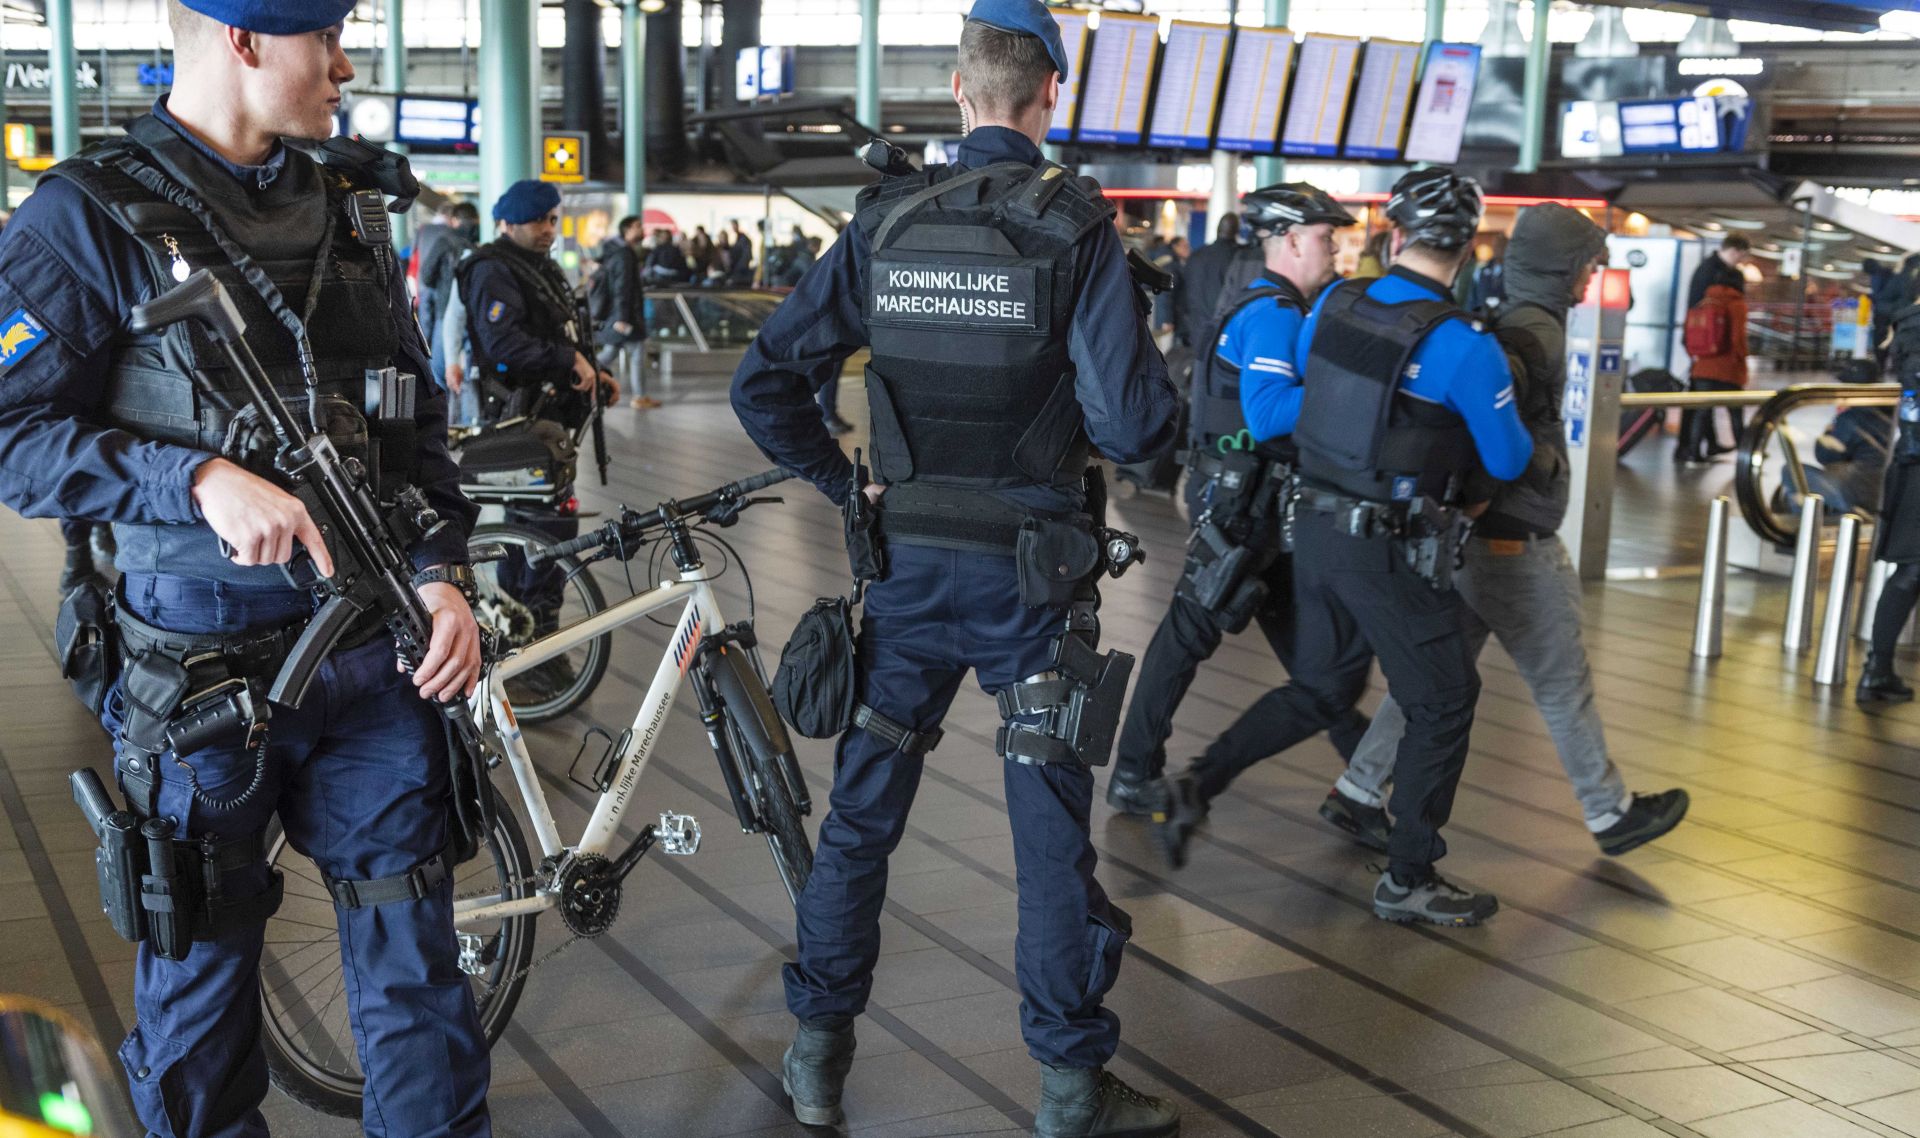 epa07446728 Extra military police units were deployed to Schiphol Airport to heighten security Schiphol, The Netherlands, 18 March 2019. Security measures are being put in places in the aftermath of the shooting on a tram in Utrecht with a possible terrorist motive. According to the the Dutch Police, several people have been injured in a shooting on a tram in the central Dutch city of Utrecht. The perpetrator is still at large.  EPA/EVERT ELZINGA